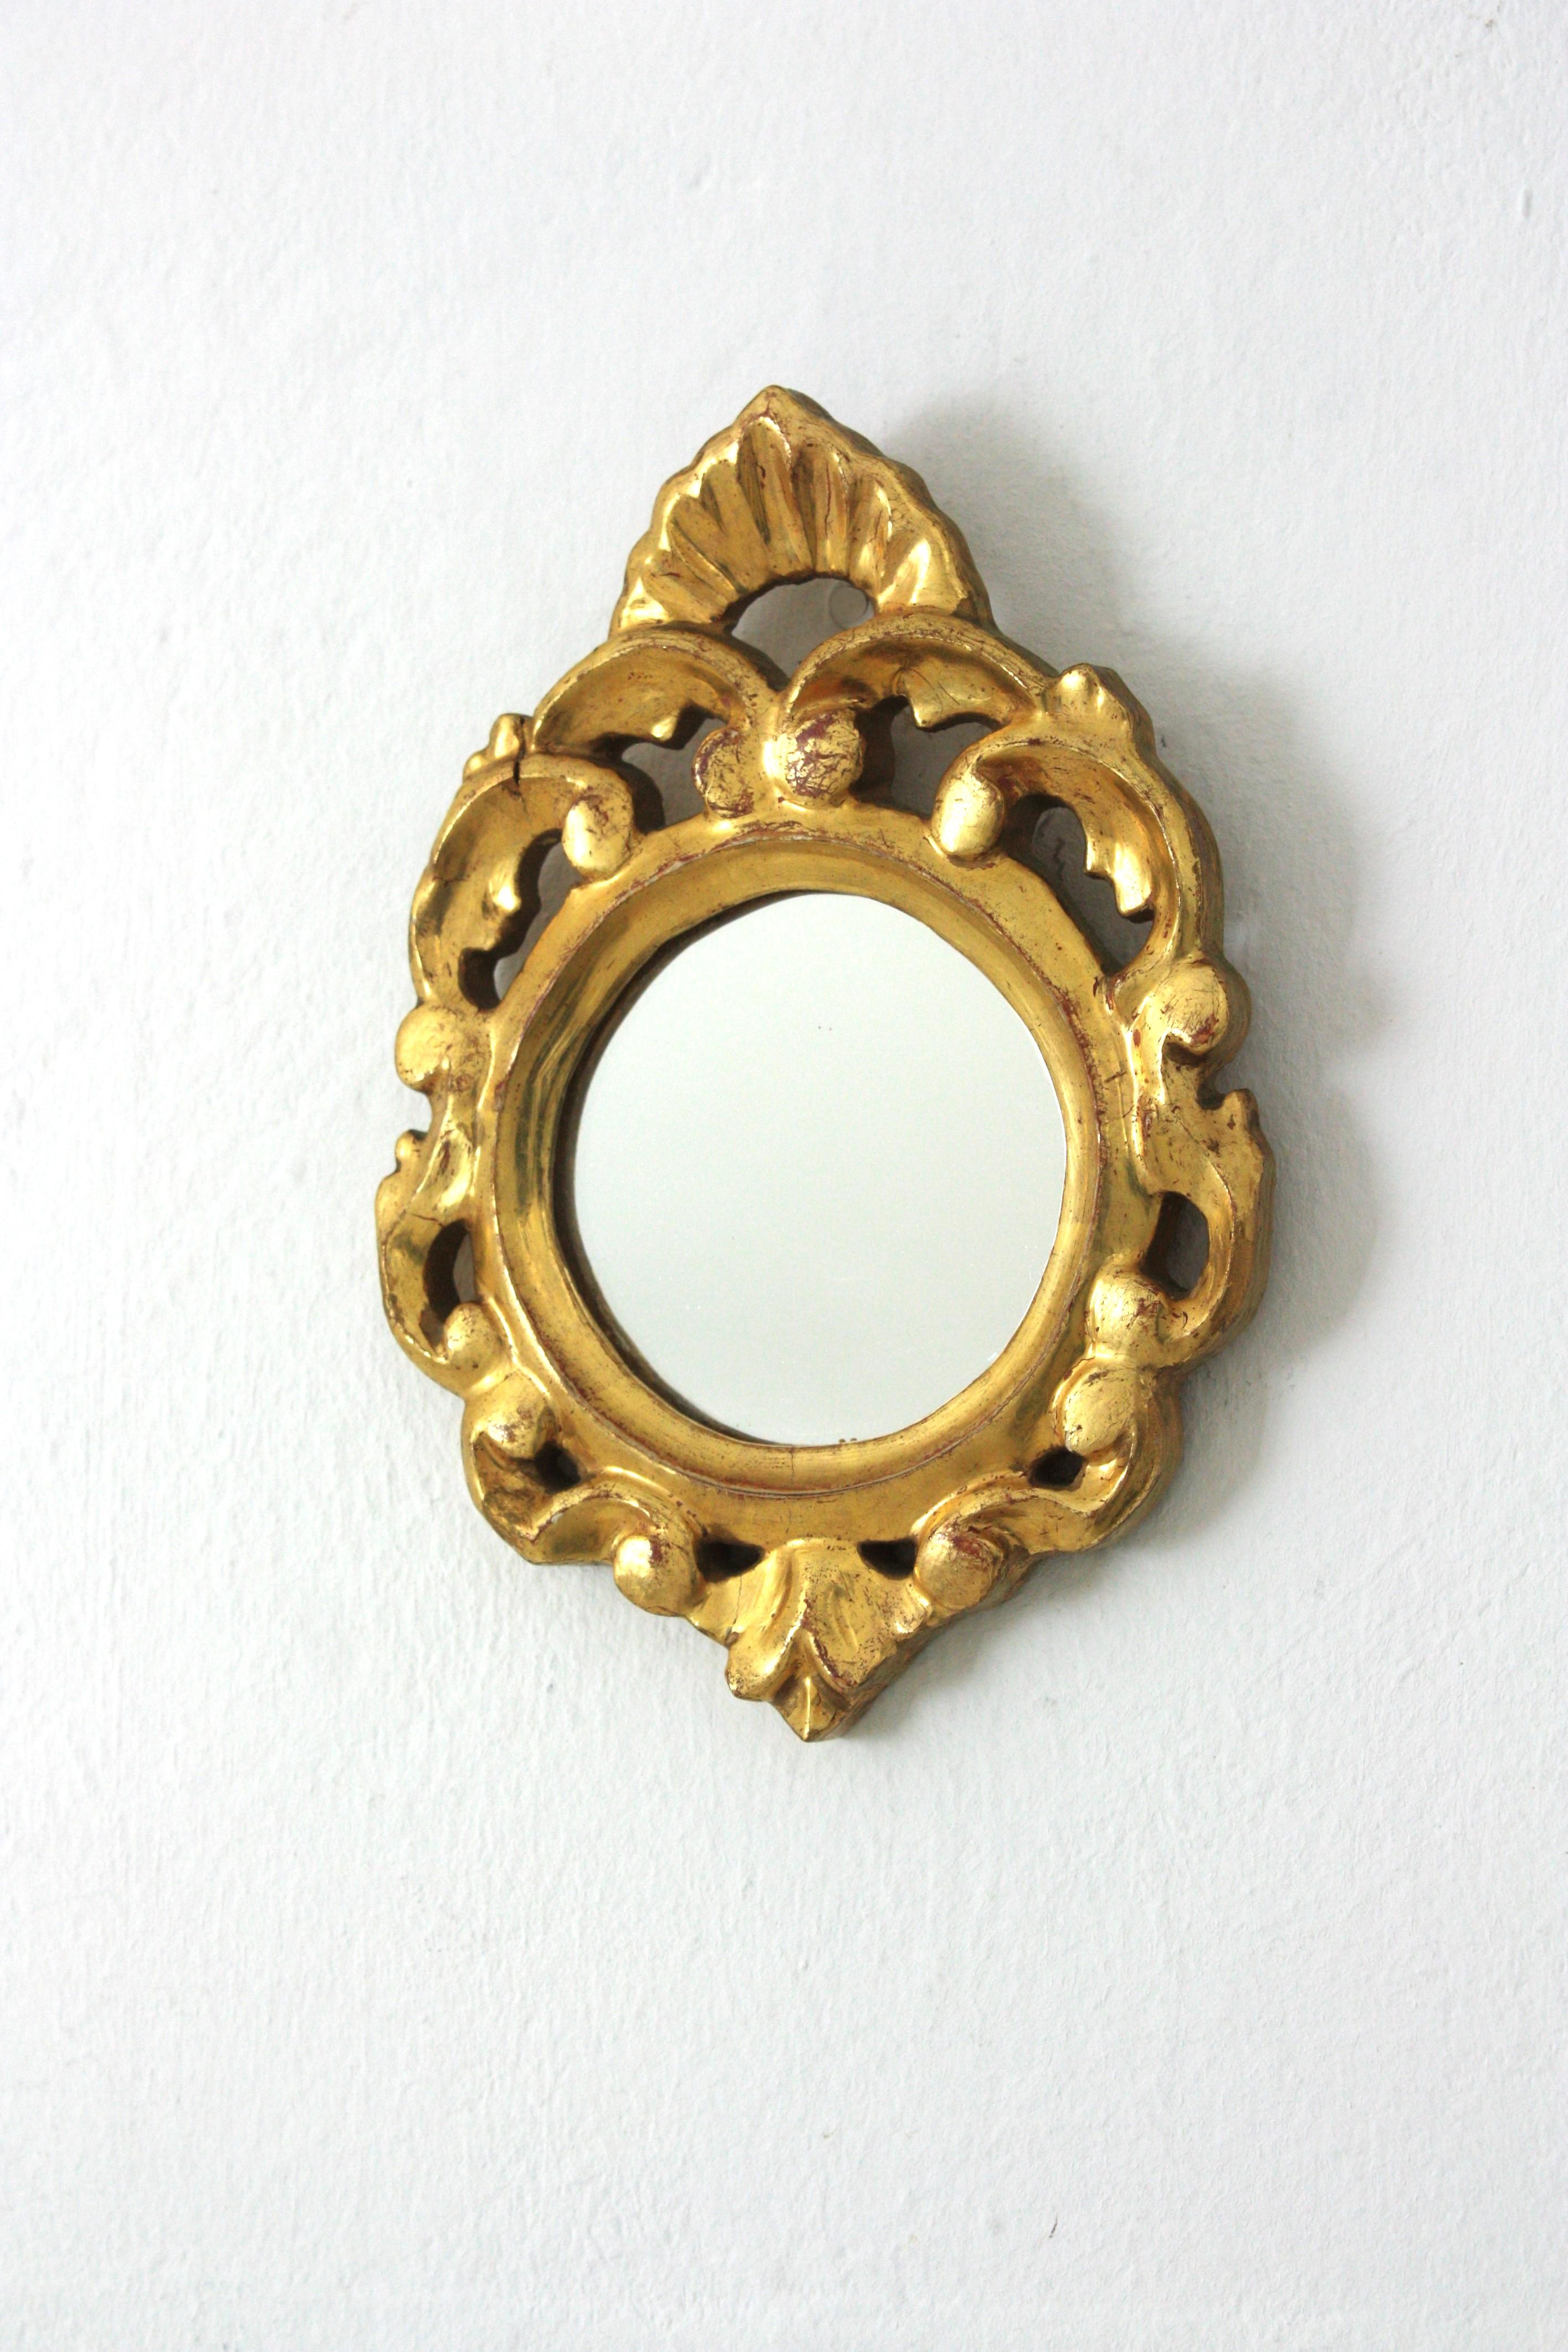 Rococo mini sized mirrors, giltwood, gold leaf, Spain, 1930s
Small scale Rococo style round mirror featuring carved gold gilt frame.
Unusual piece due to its size.
Nice aged patina showing its original gold leaf gilding.
Interesting for collectors